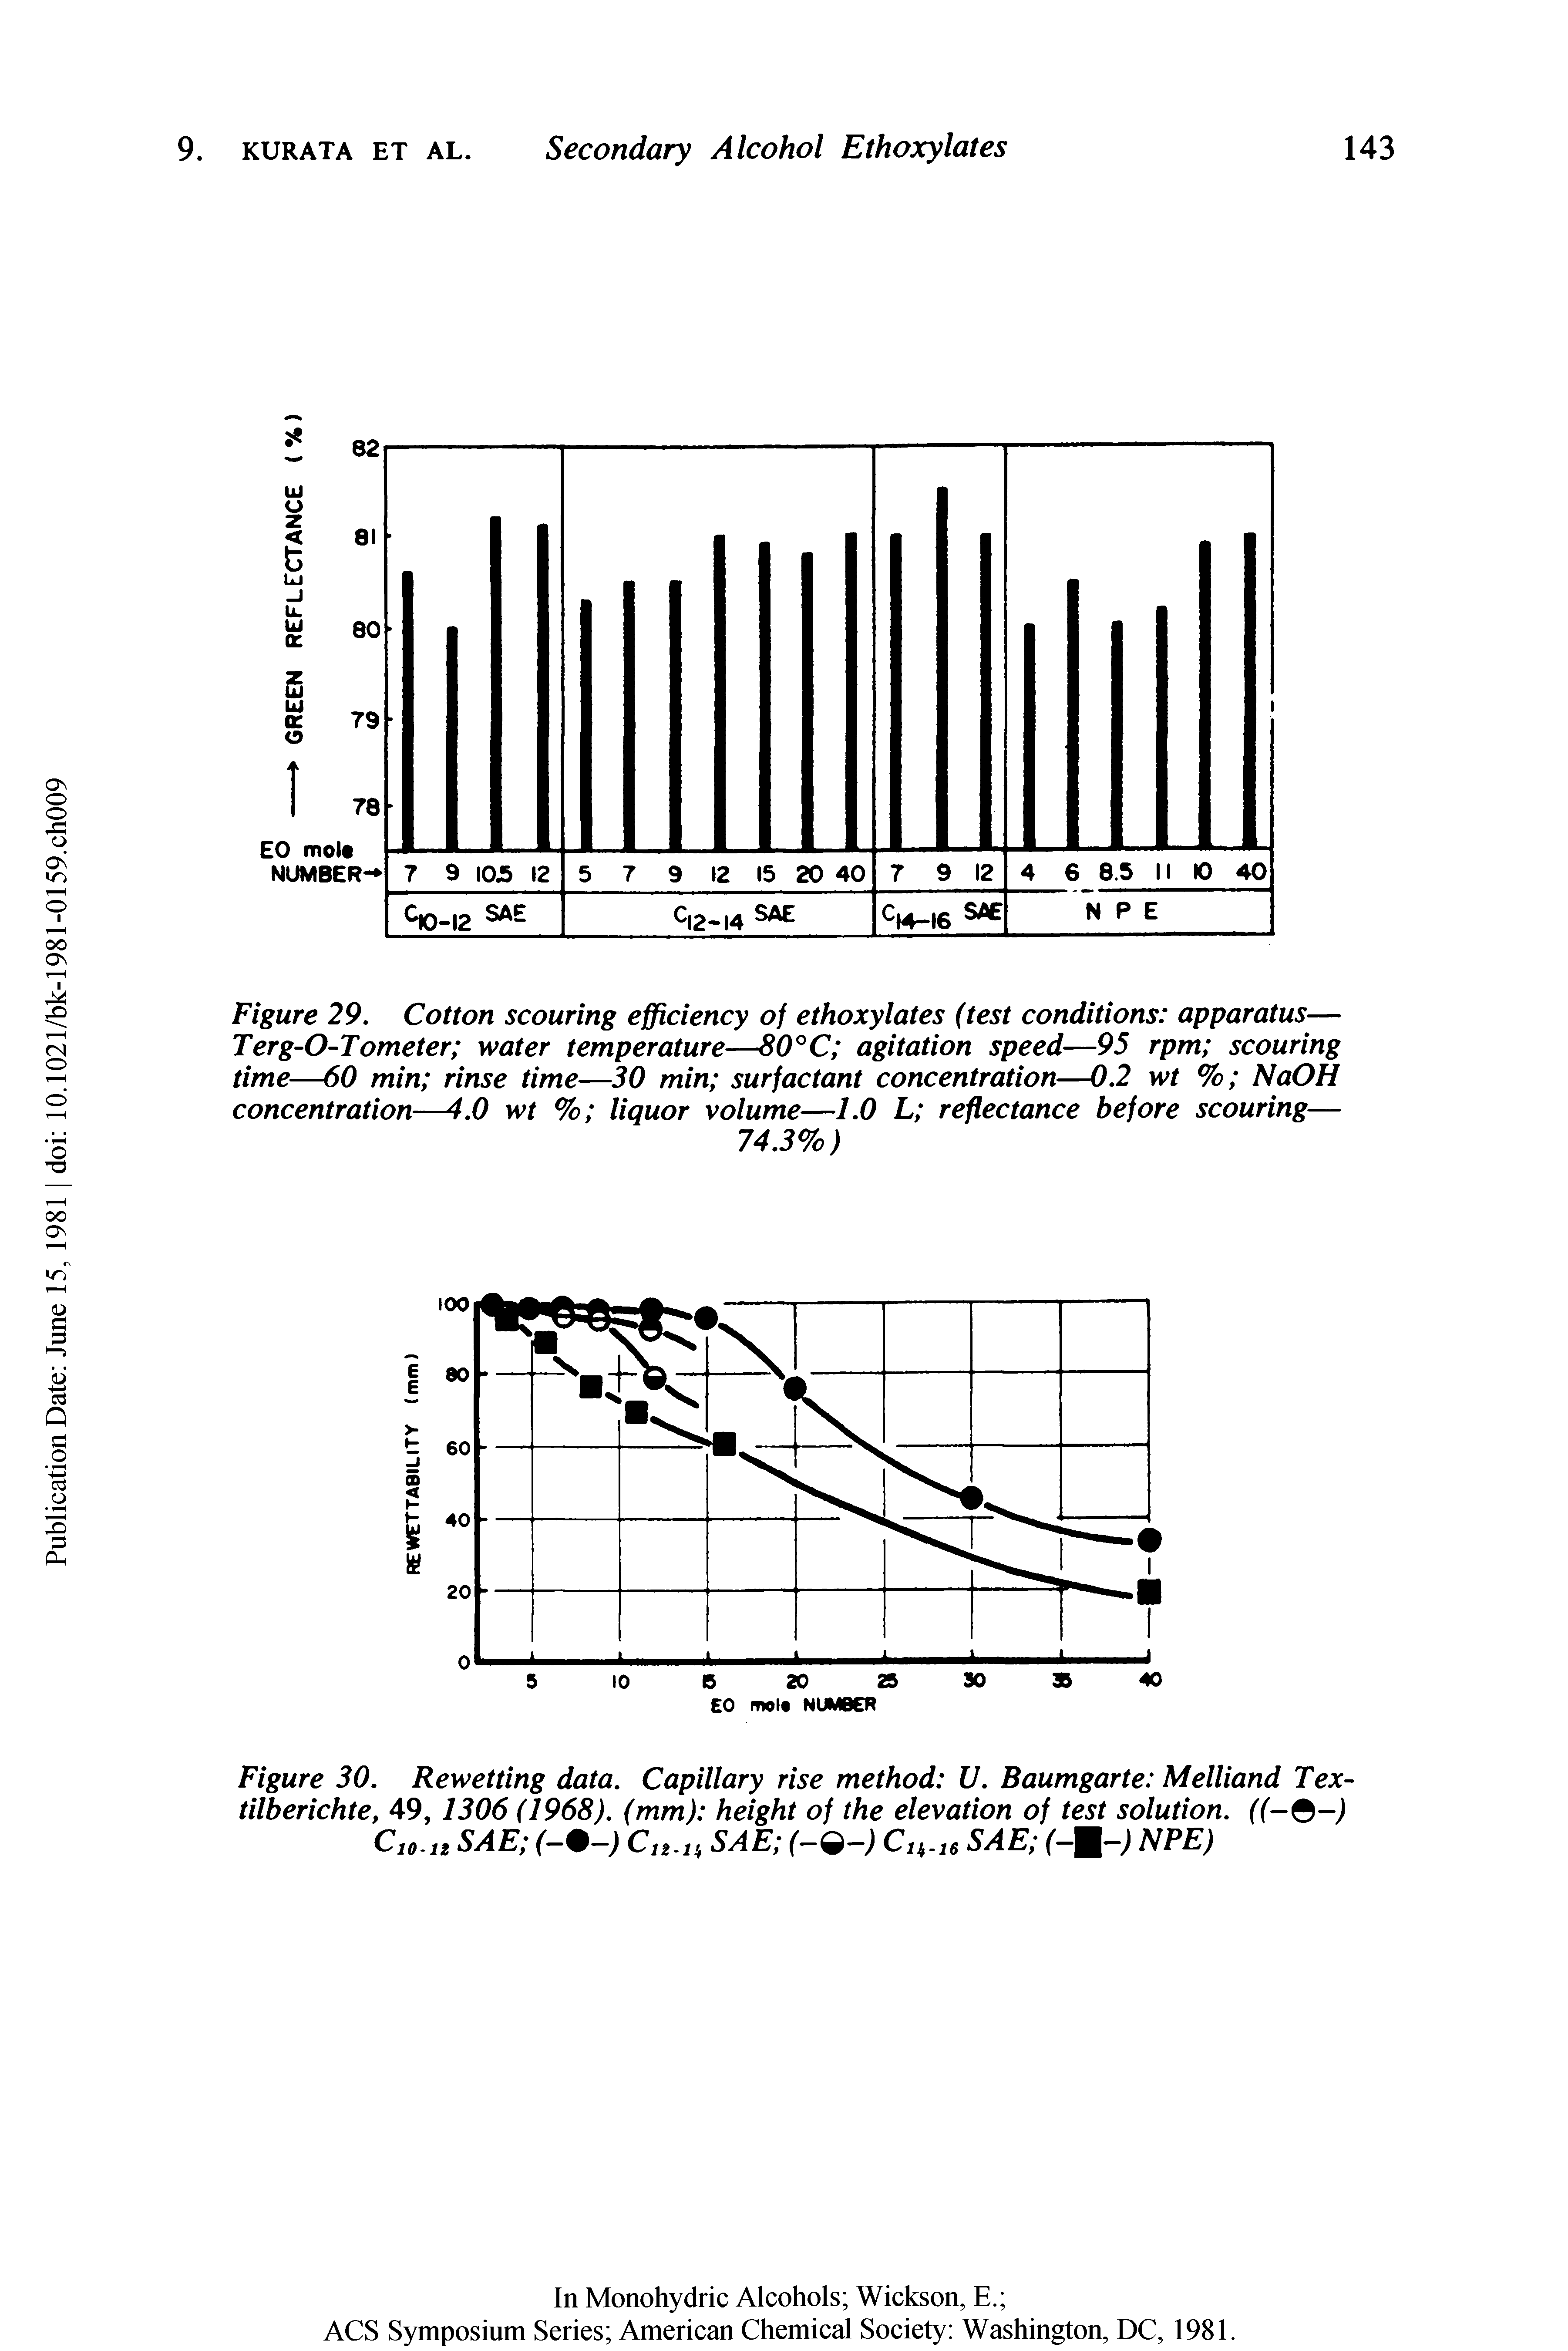 Figure 29. Cotton scouring efficiency of ethoxylates (test conditions apparatus— Terg-O-Tometer water temperature—80°C agitation speed—95 rpm scouring time—60 min rinse time—30 min surfactant concentration—0.2 wt % NaOH concentration—4.0 wt % liquor volume—1.0 L reflectance before scouring—...